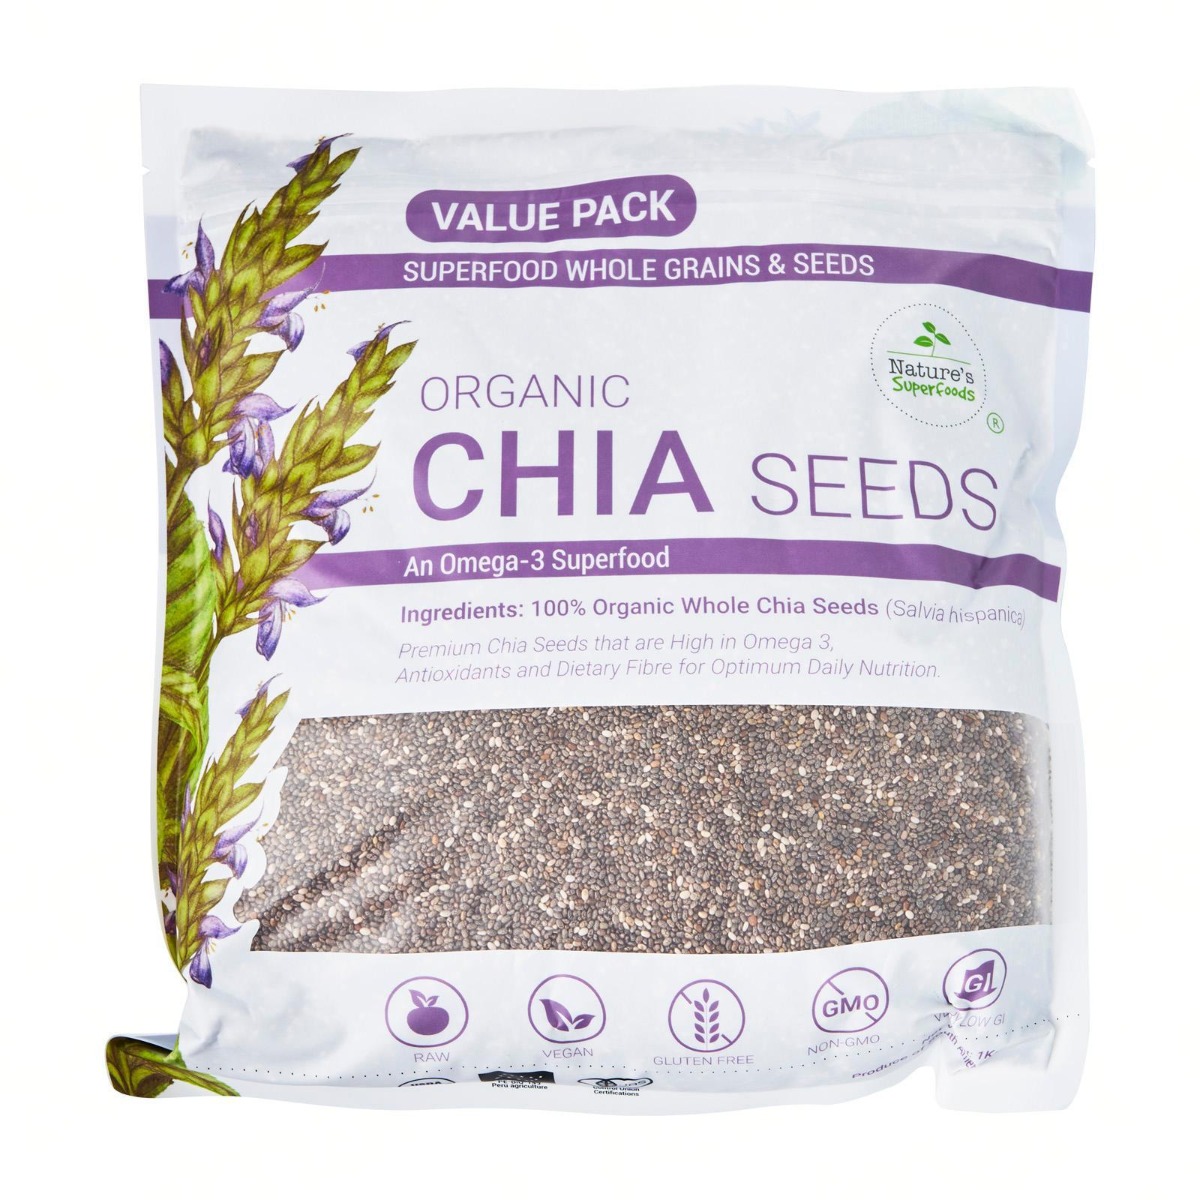 Organic Black Chia Seeds-1kg resealable pack front